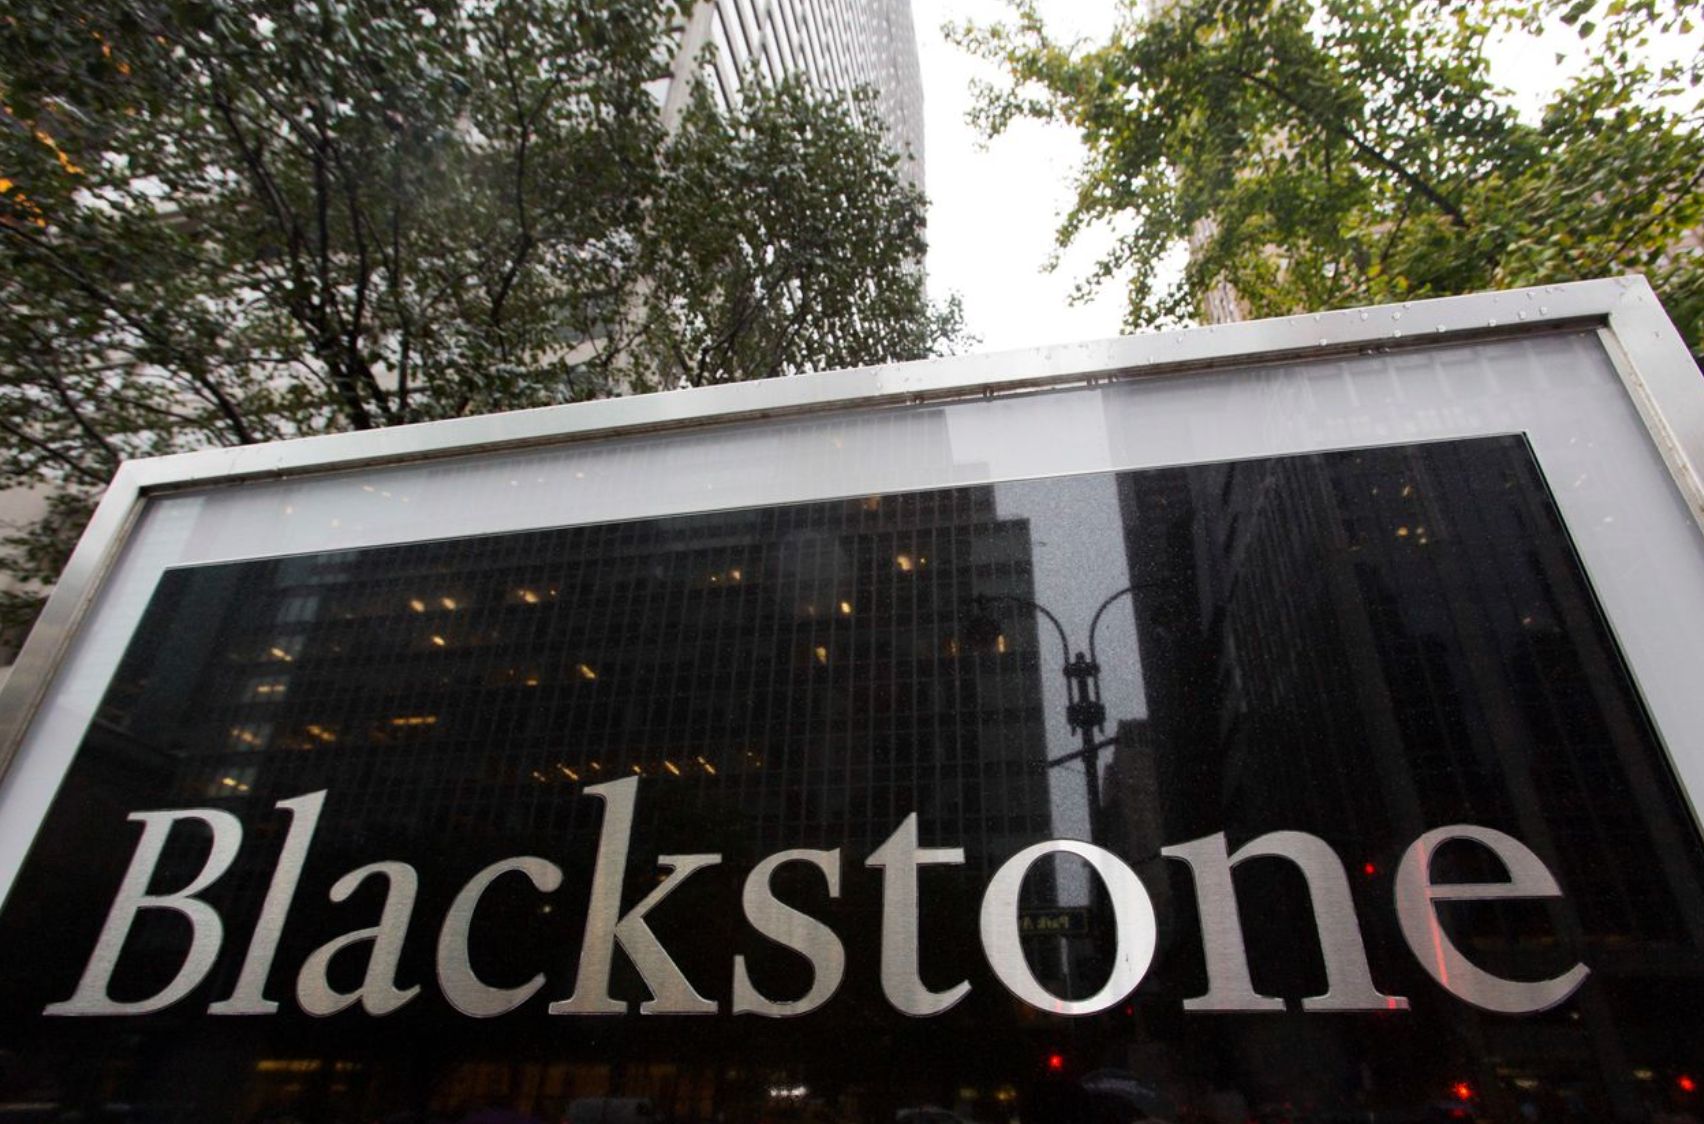 Final Regional Approval for Blackstone’s Acquisition of Crown Resorts Received